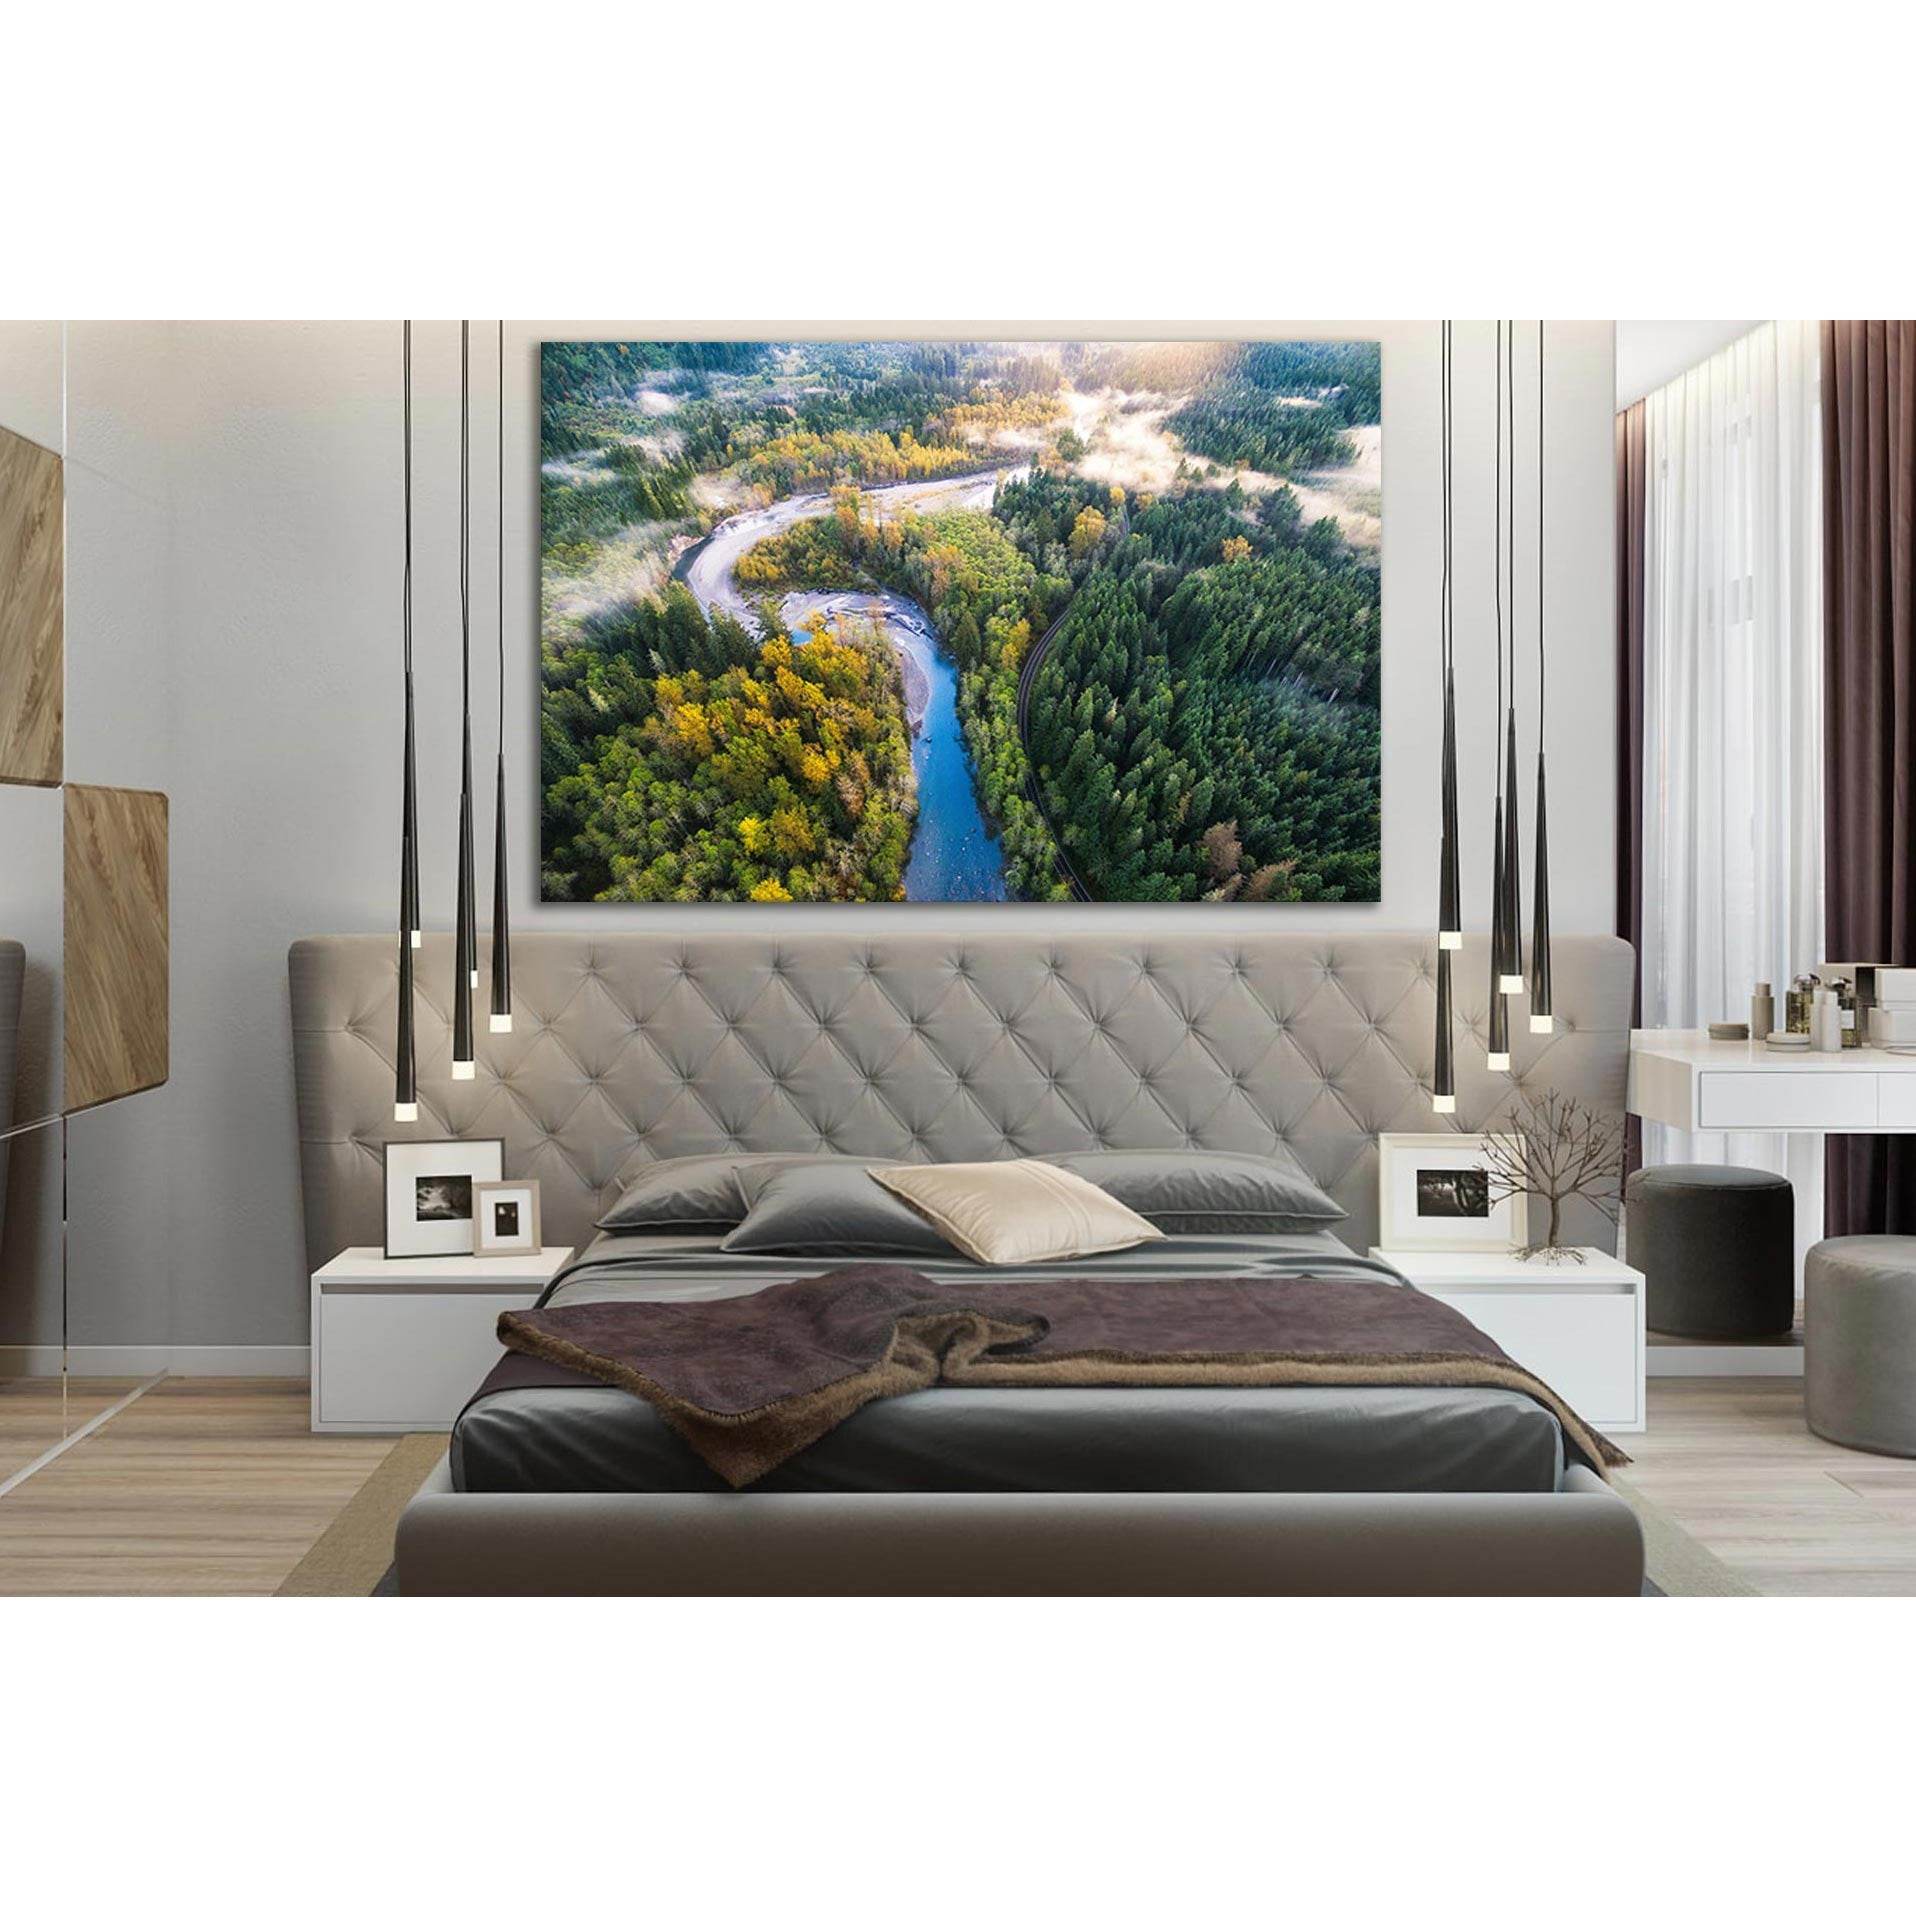 River In Forest Aerial View №SL1572 Ready to Hang Canvas Print